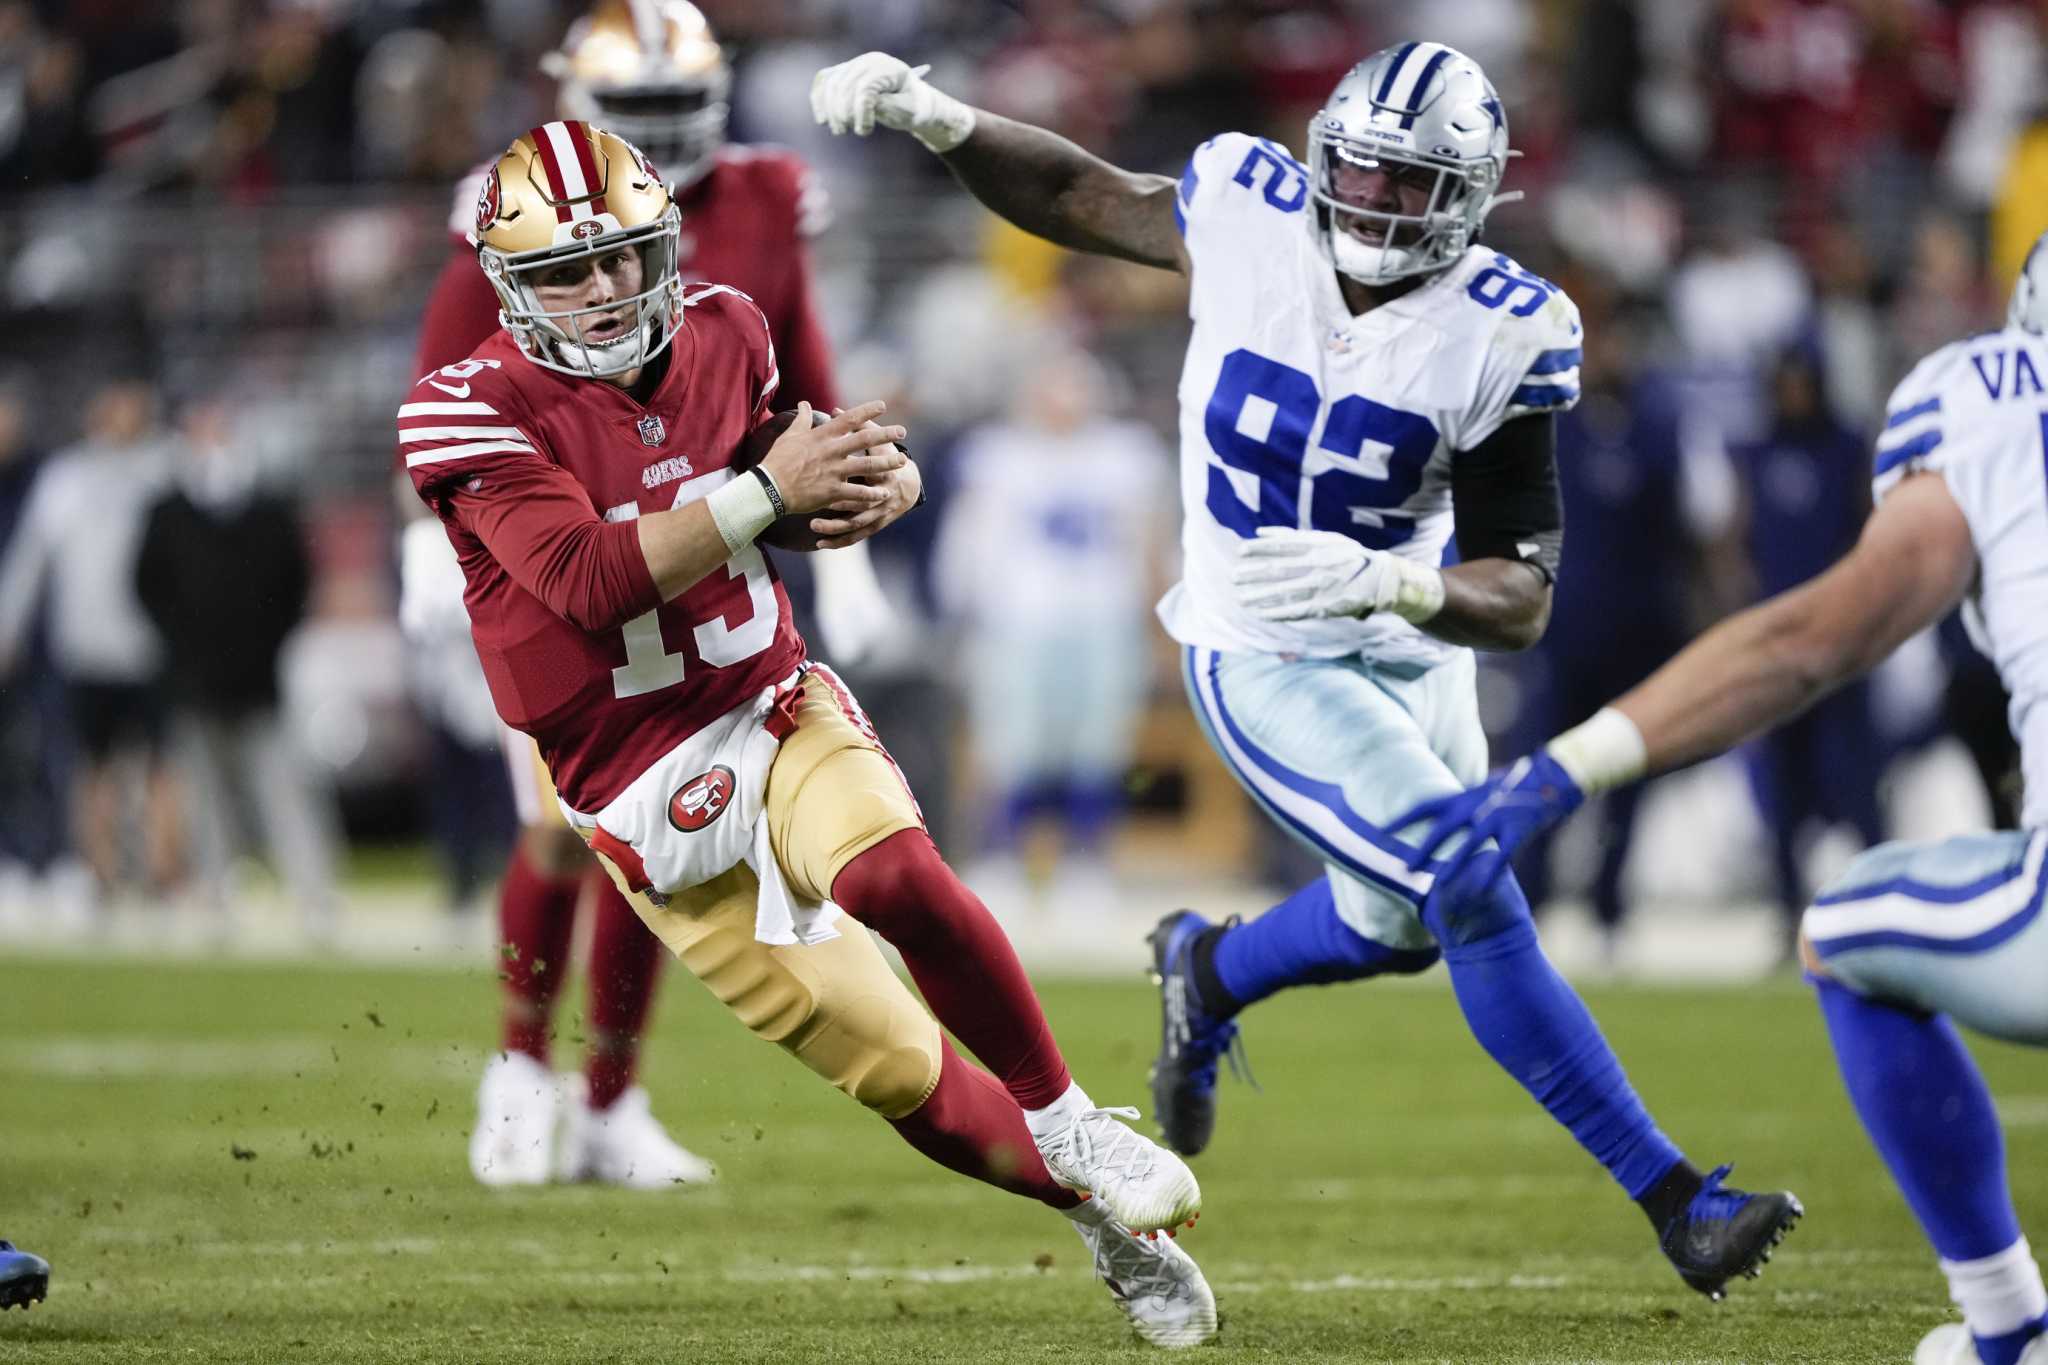 49ers Sunday Night Football game vs. Cowboys should be epic